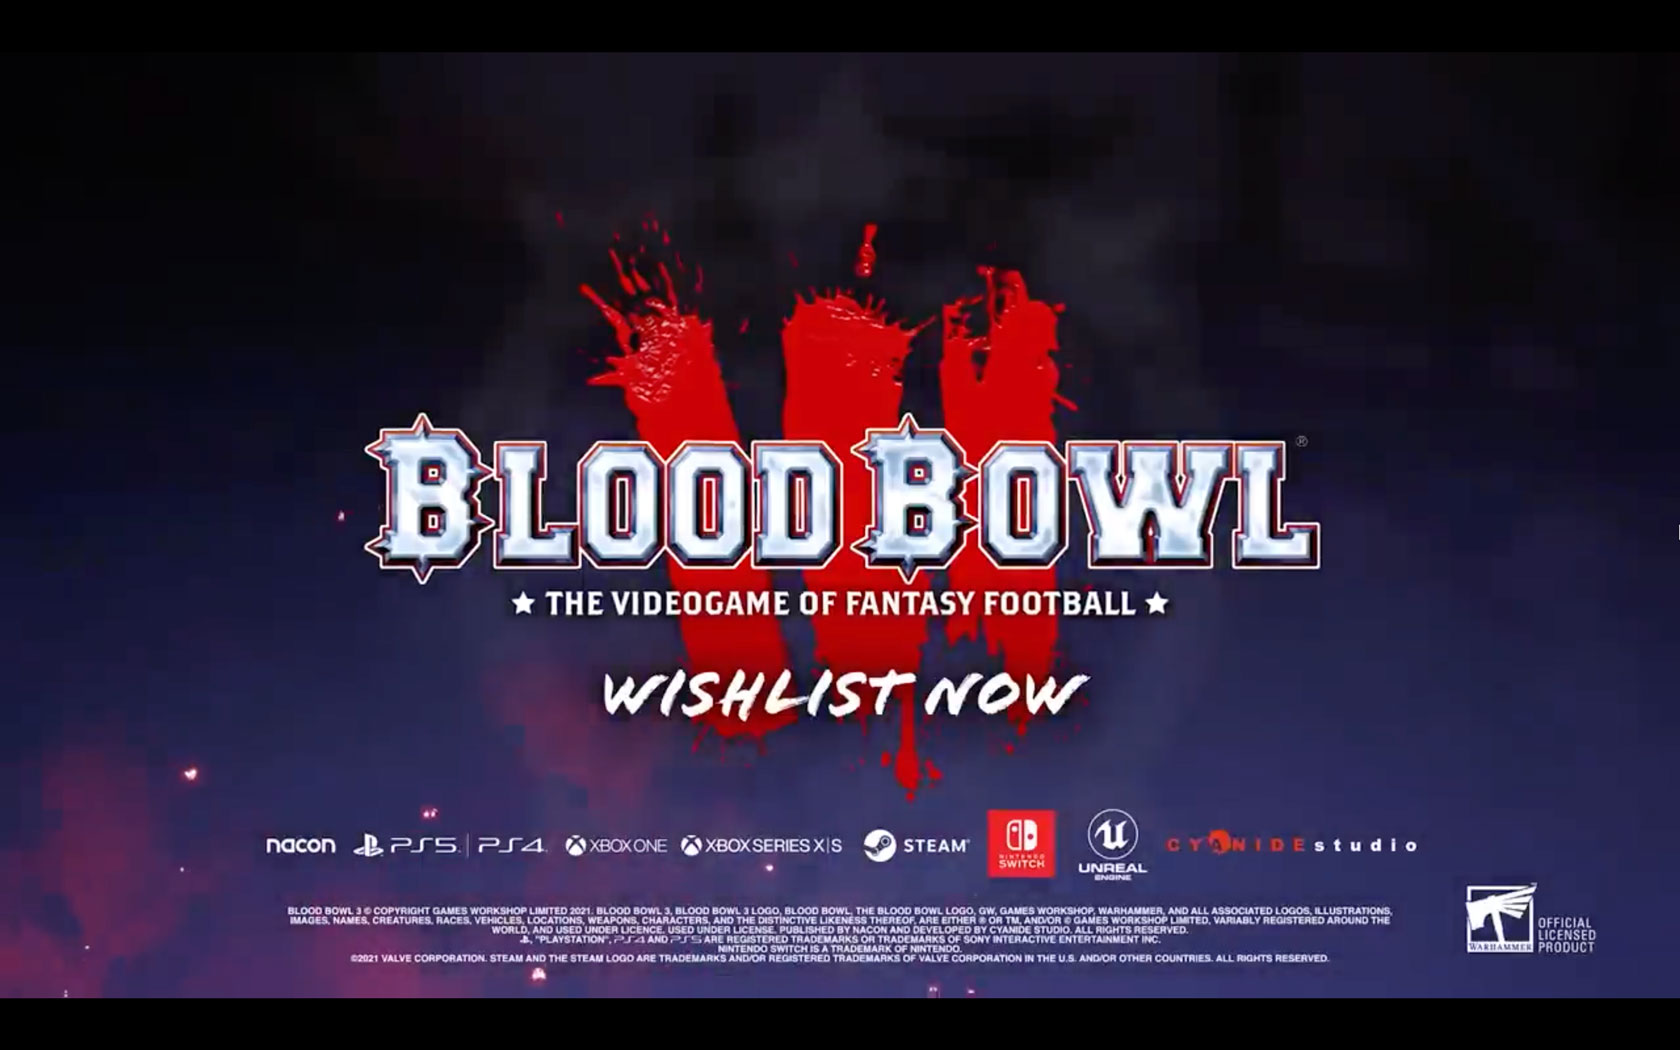 Featured image for “Blood Bowl 3”